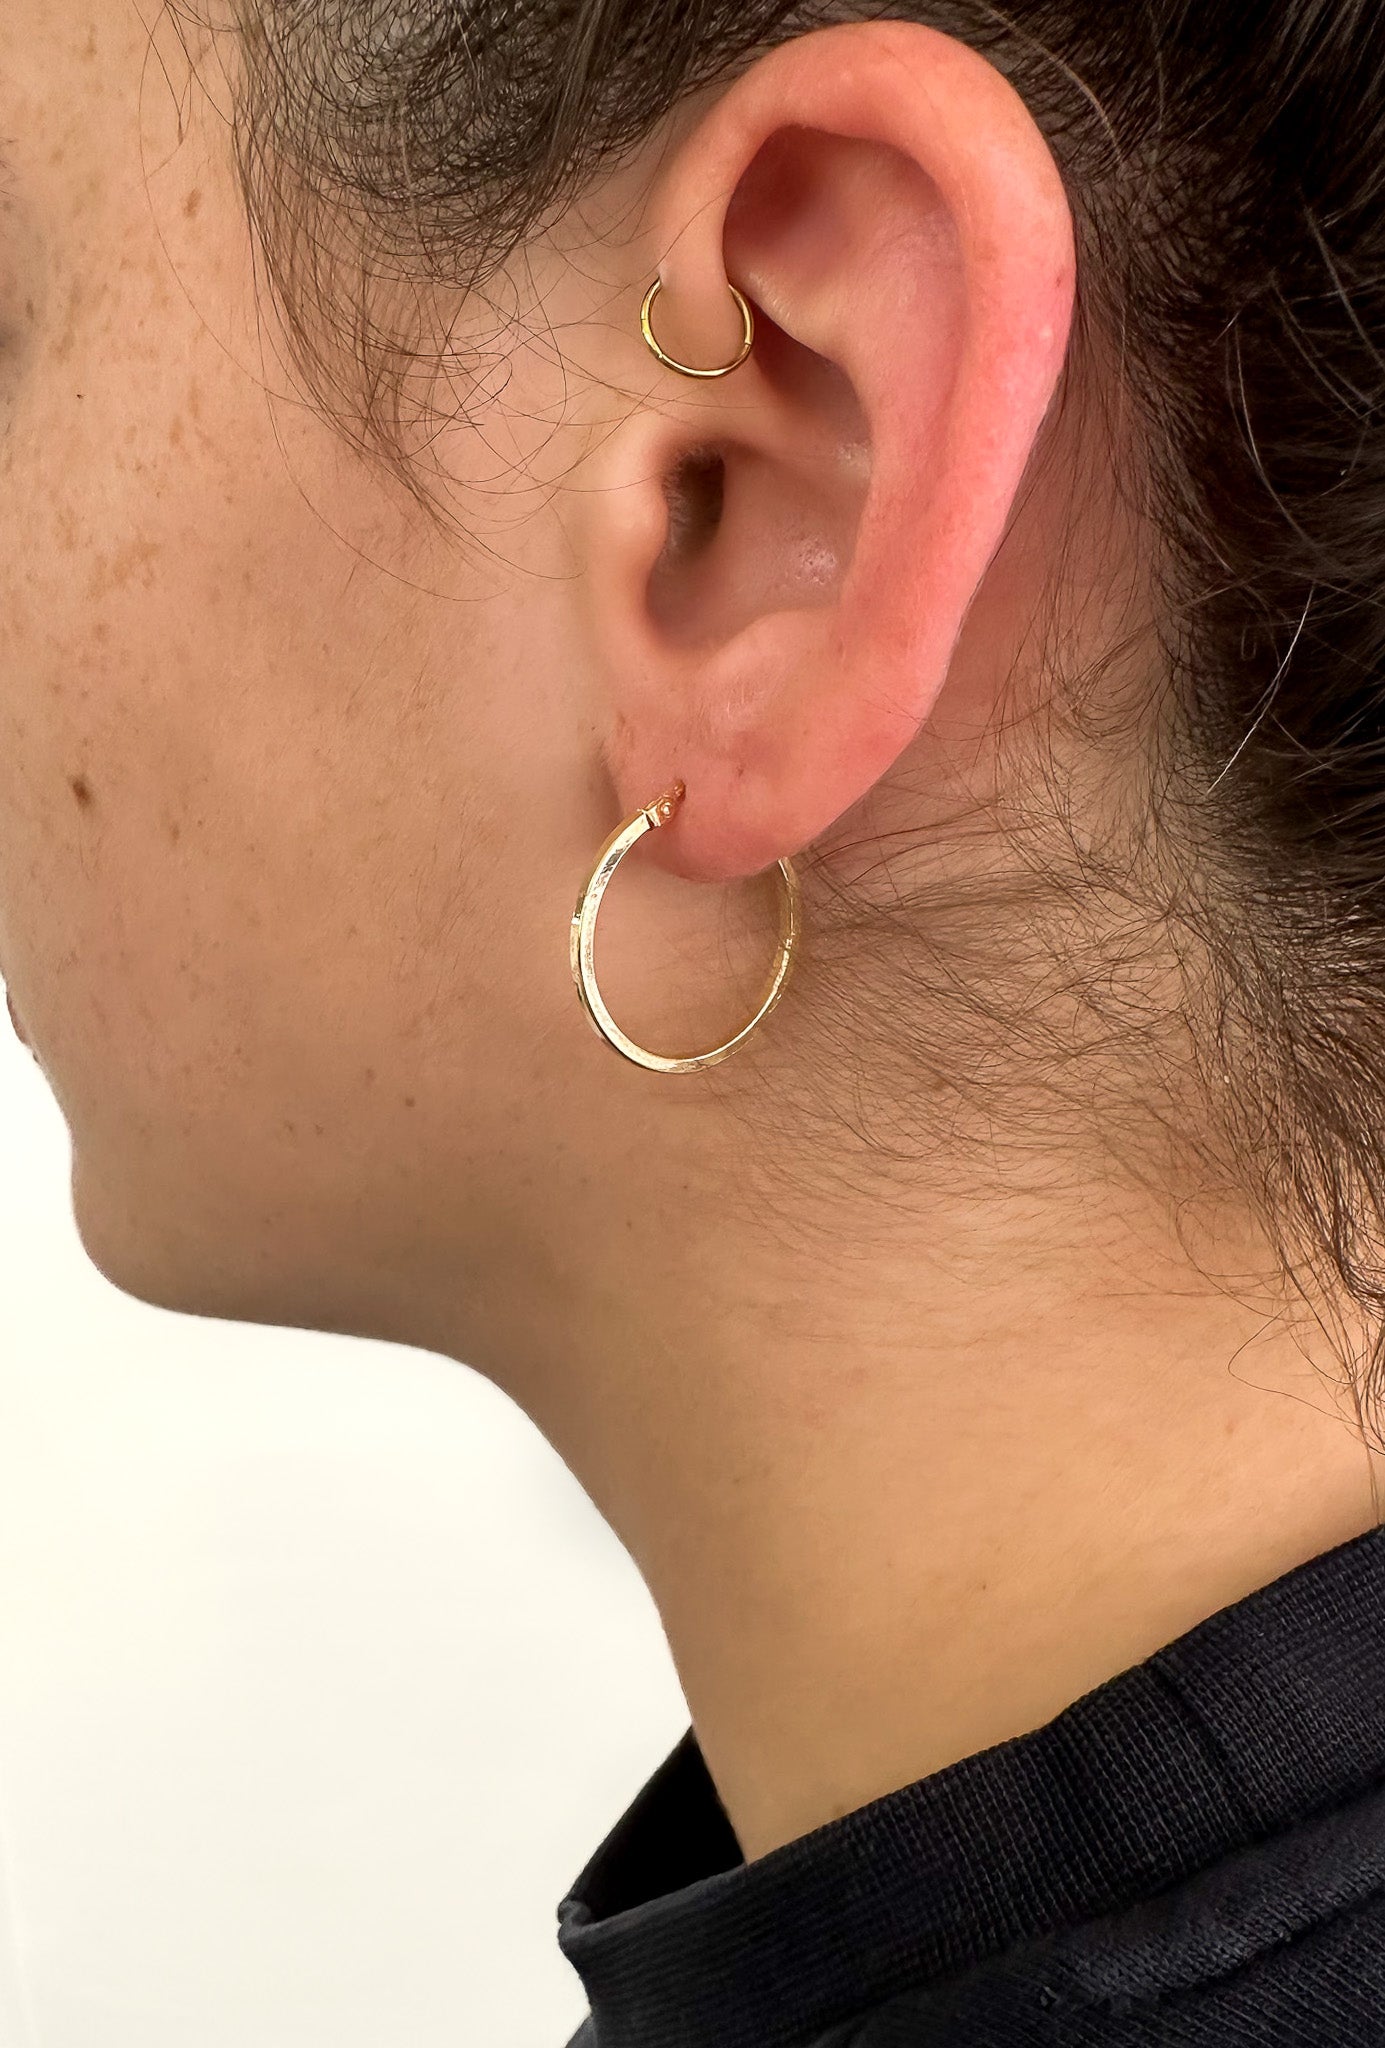 model wearsLORNE 9ct Yellow Gold 20mm Hoop Earring—a minimalist's dream of clean lines and reflective surfaces.